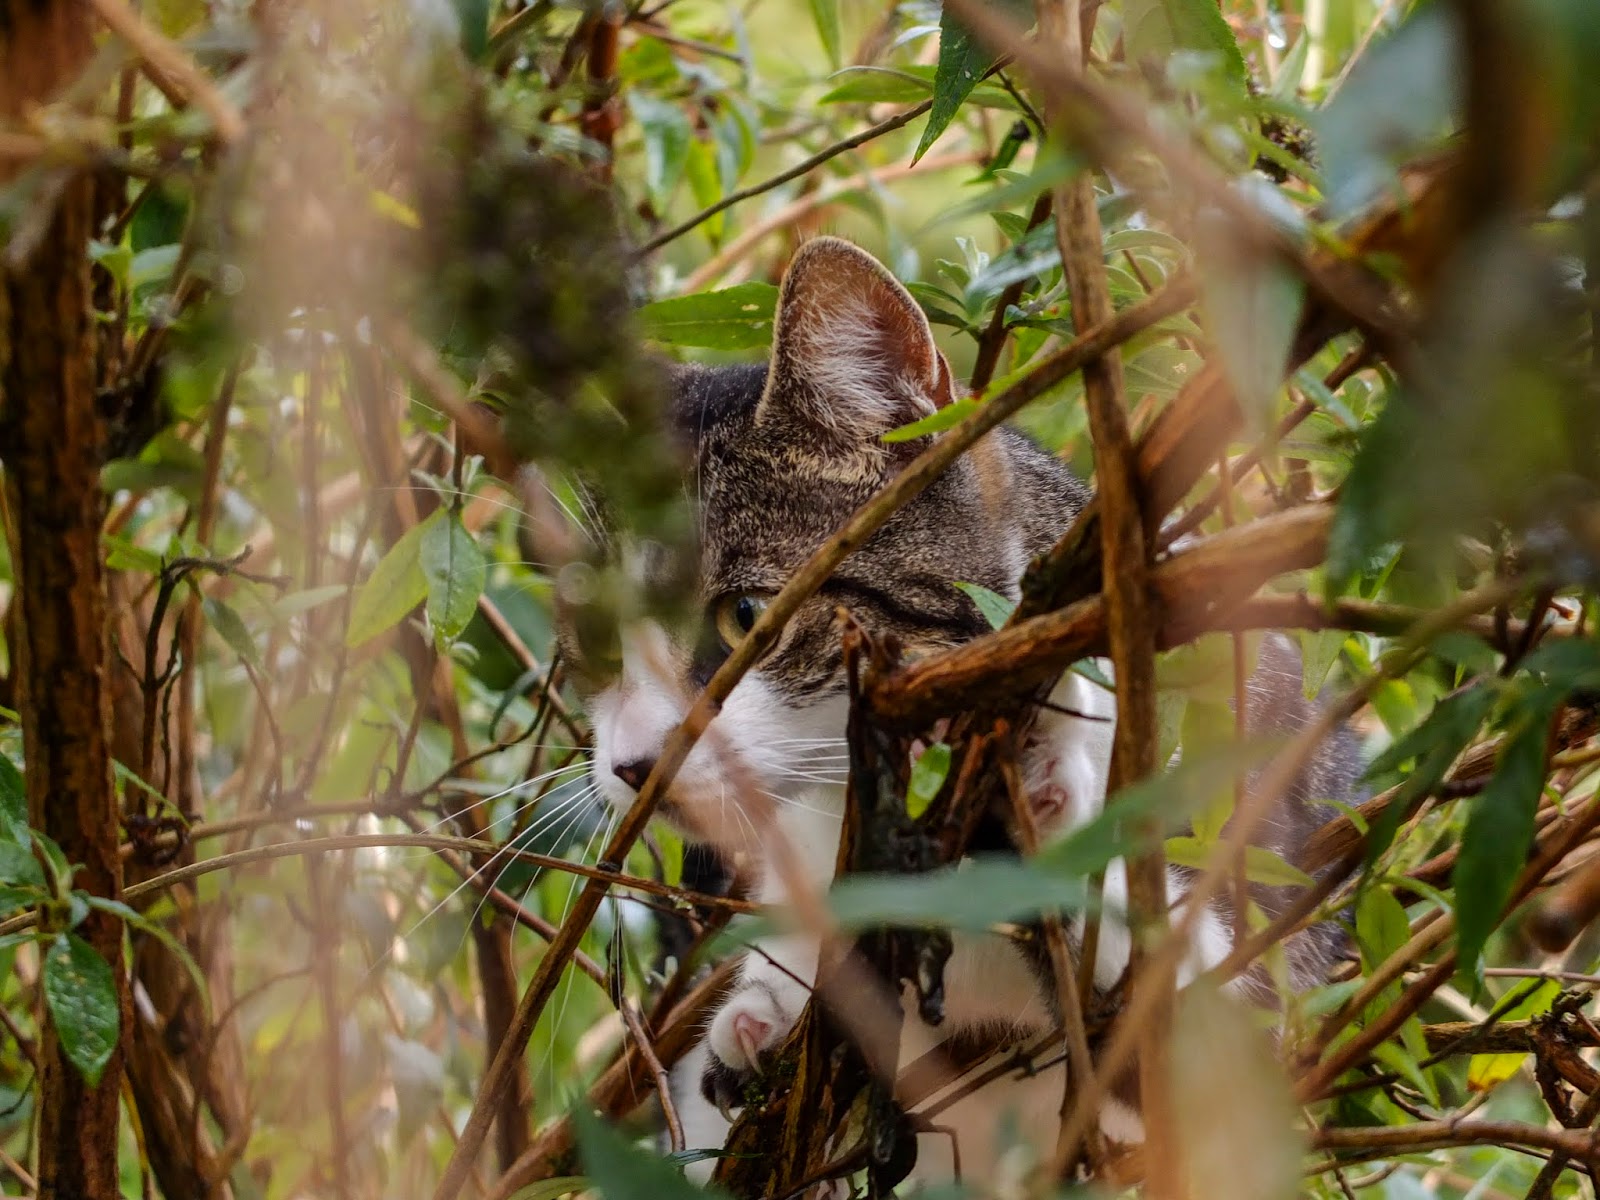 A cat hiding in a bush and blending with the branches.